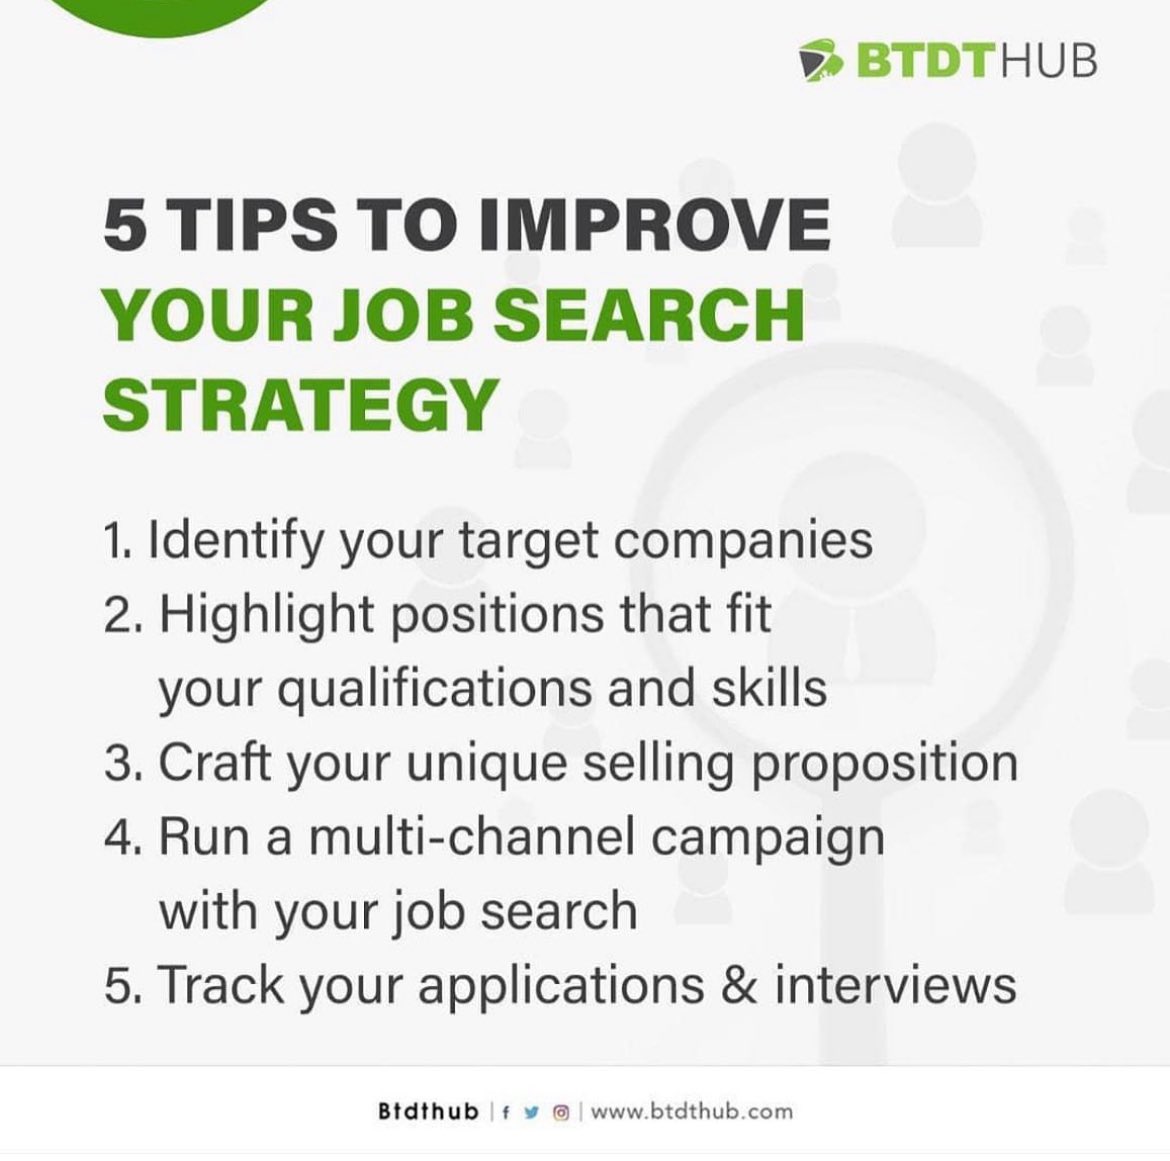 Rebrand yourself, land more job interviews, and improve your career prospects with a well-crafted CV, targeted Cover Letter, and optimised LinkedIn Profile. Here are 5 tips to improve your job search strategy and position yourself for a successful career. Follow us for more…